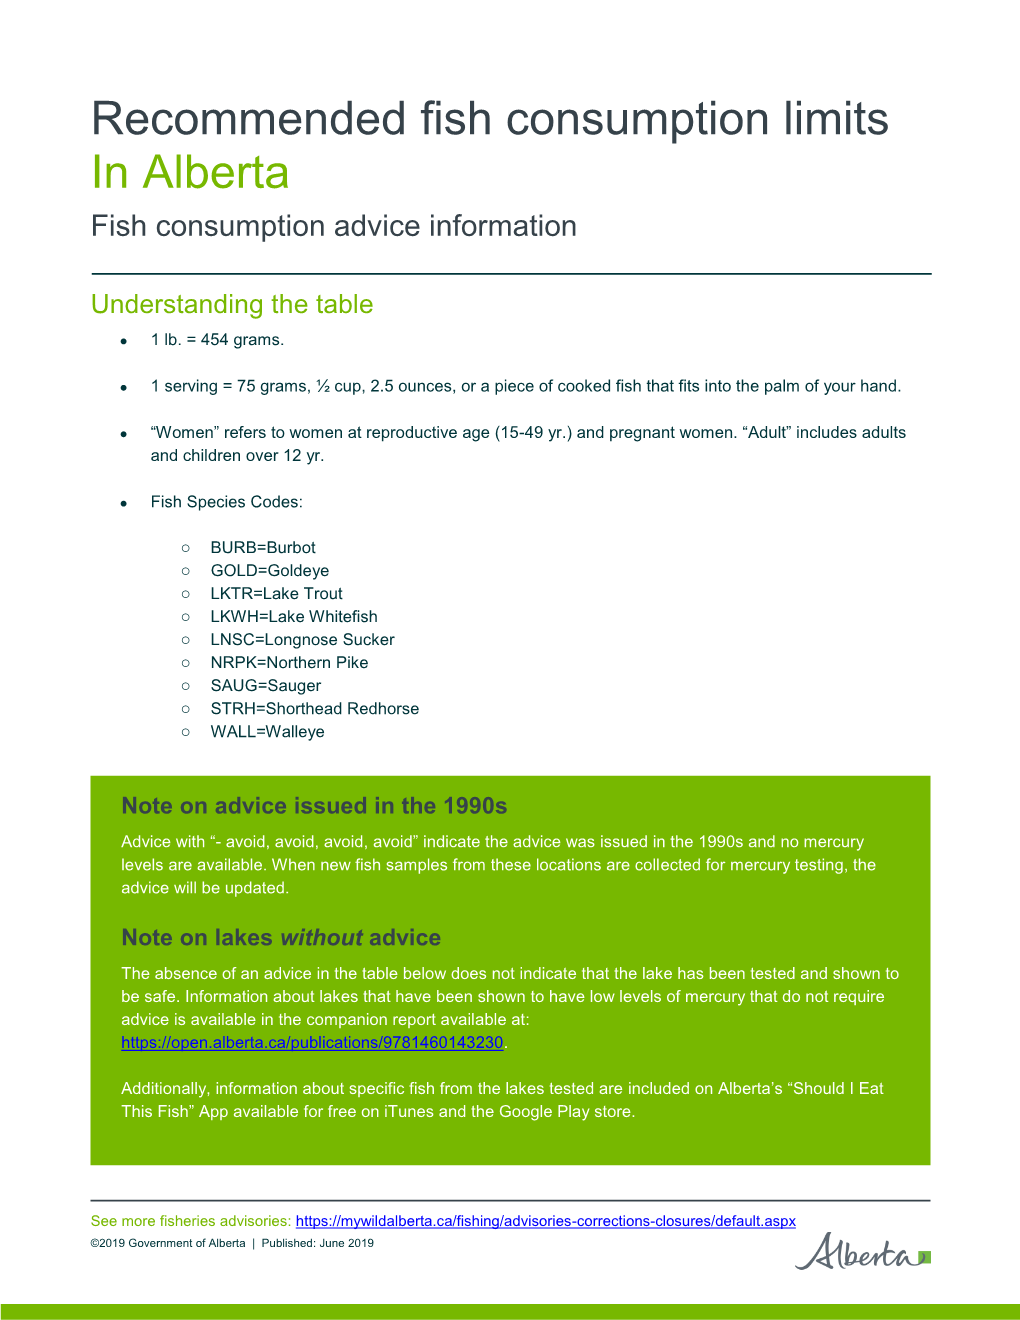 Recommended Fish Consumption Limits in Alberta Fish Consumption Advice Information